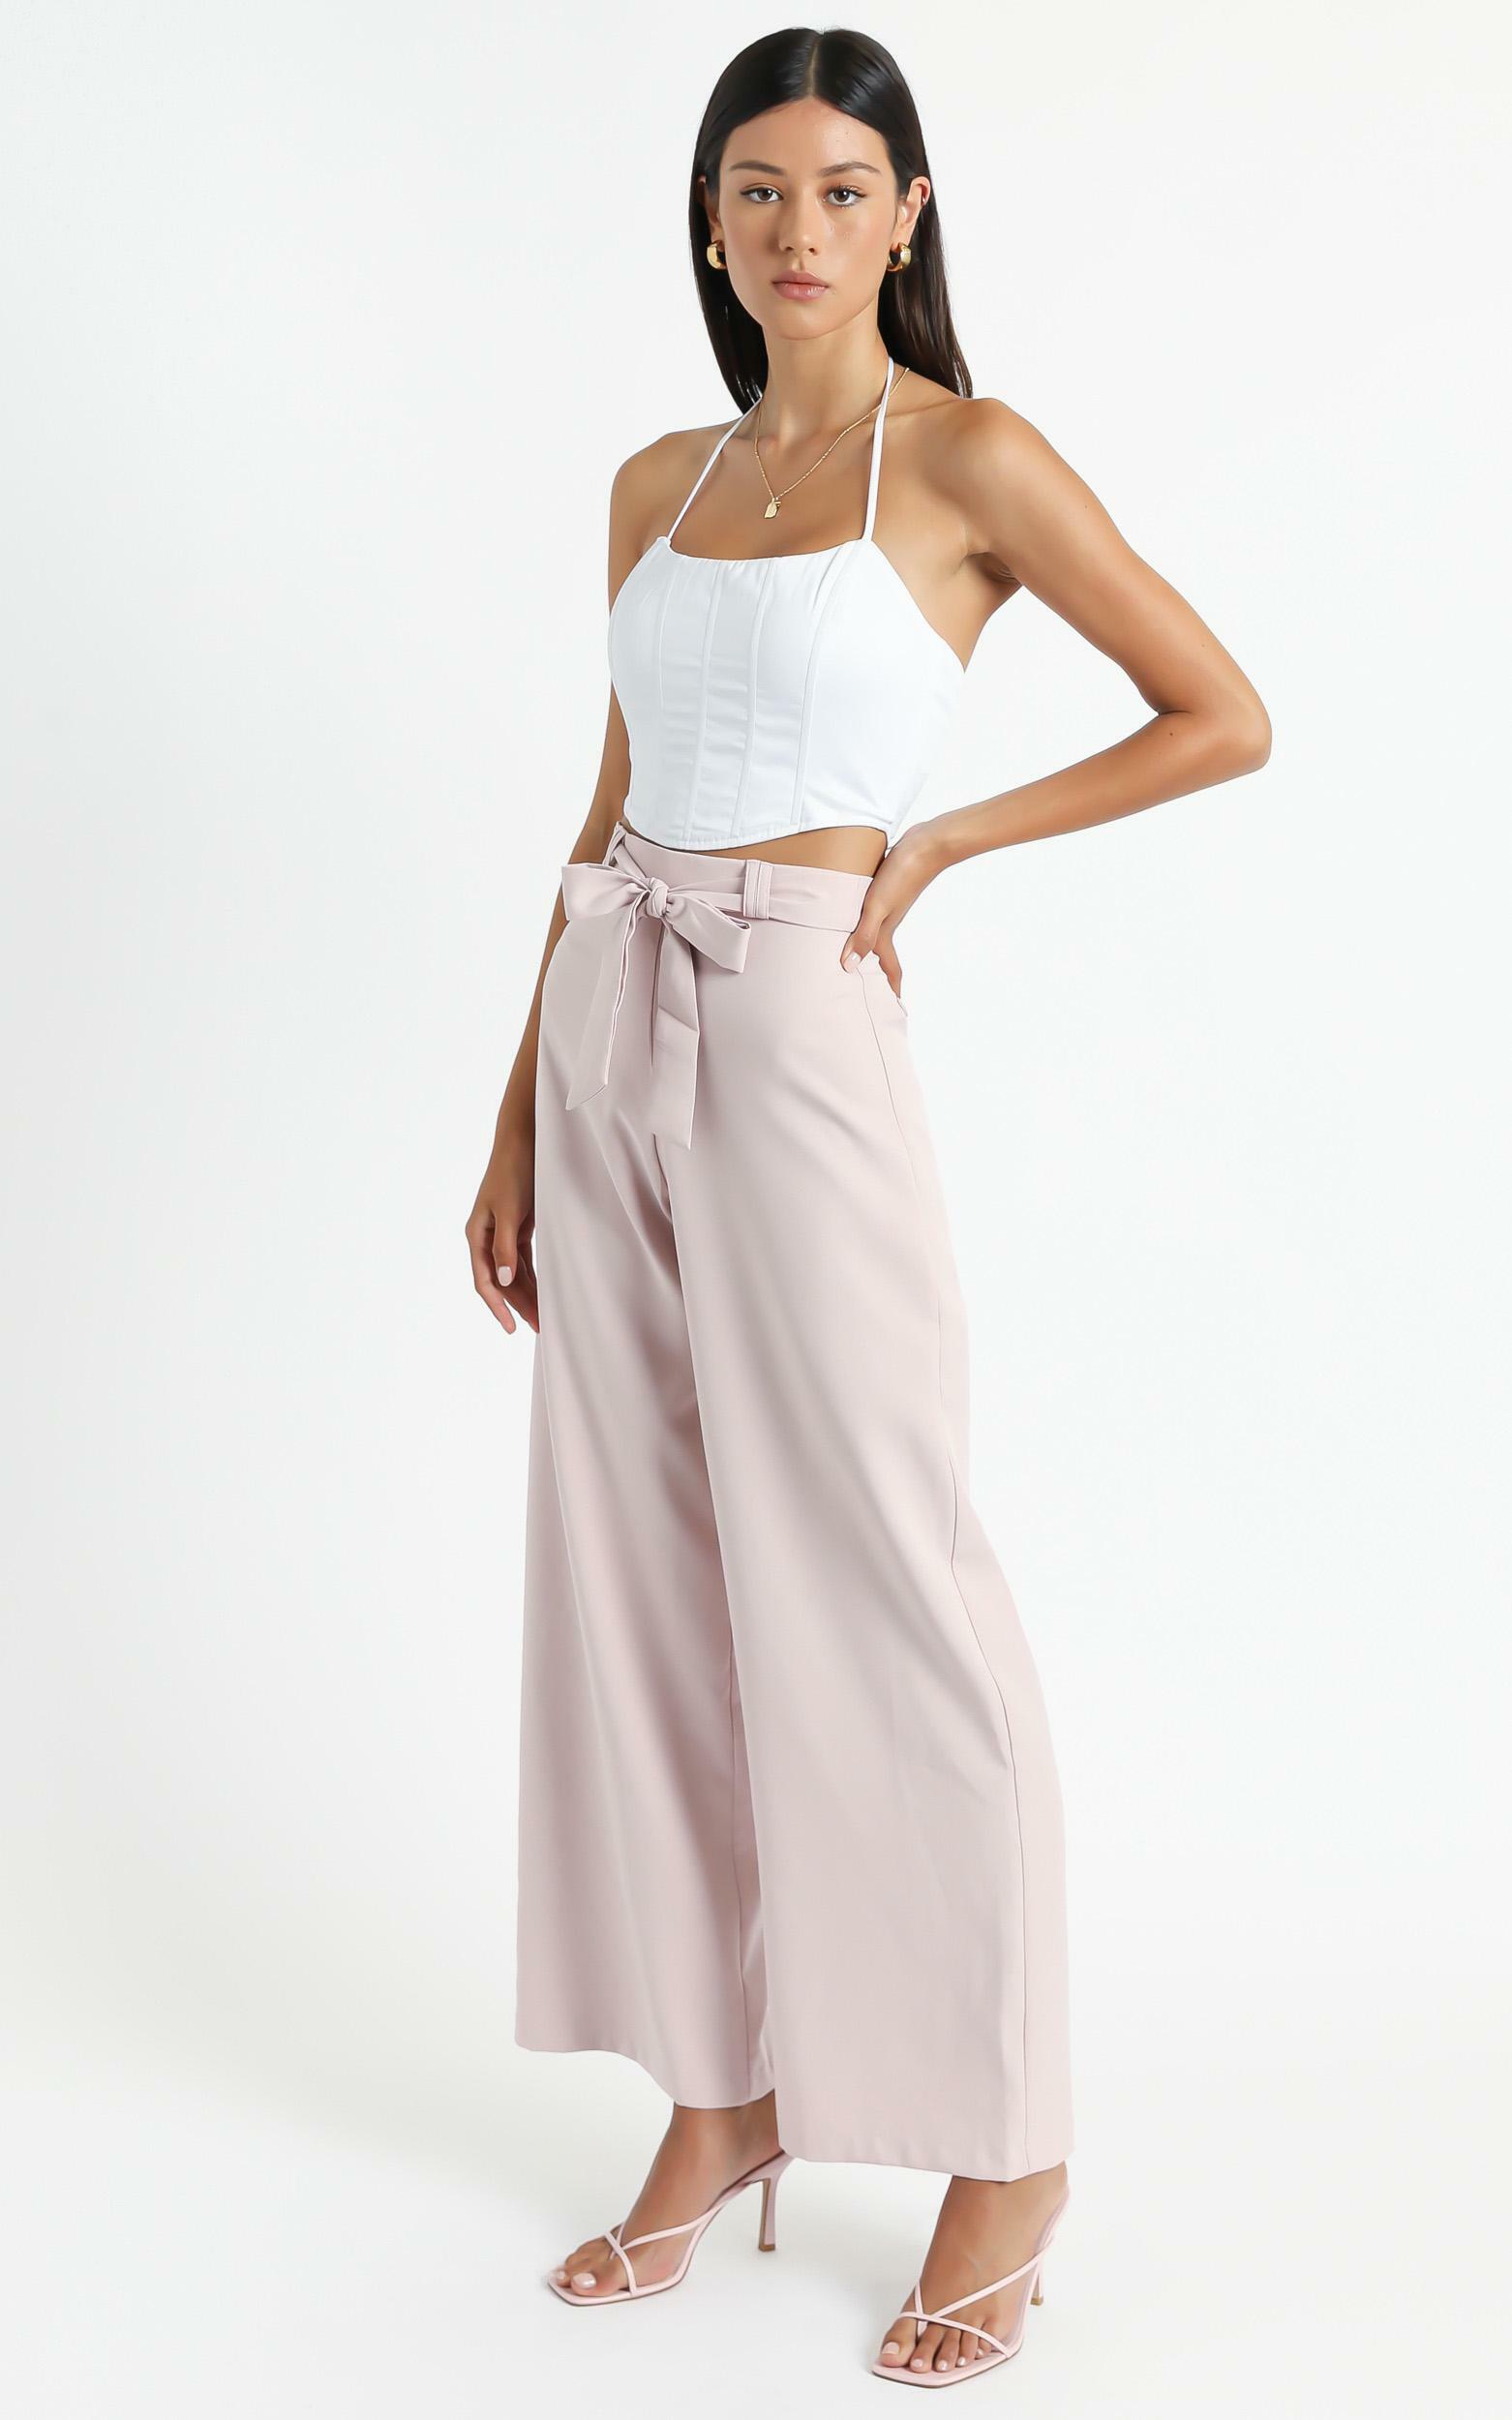 Miss Gold Pants in Blush - 12, PNK2, hi-res image number null